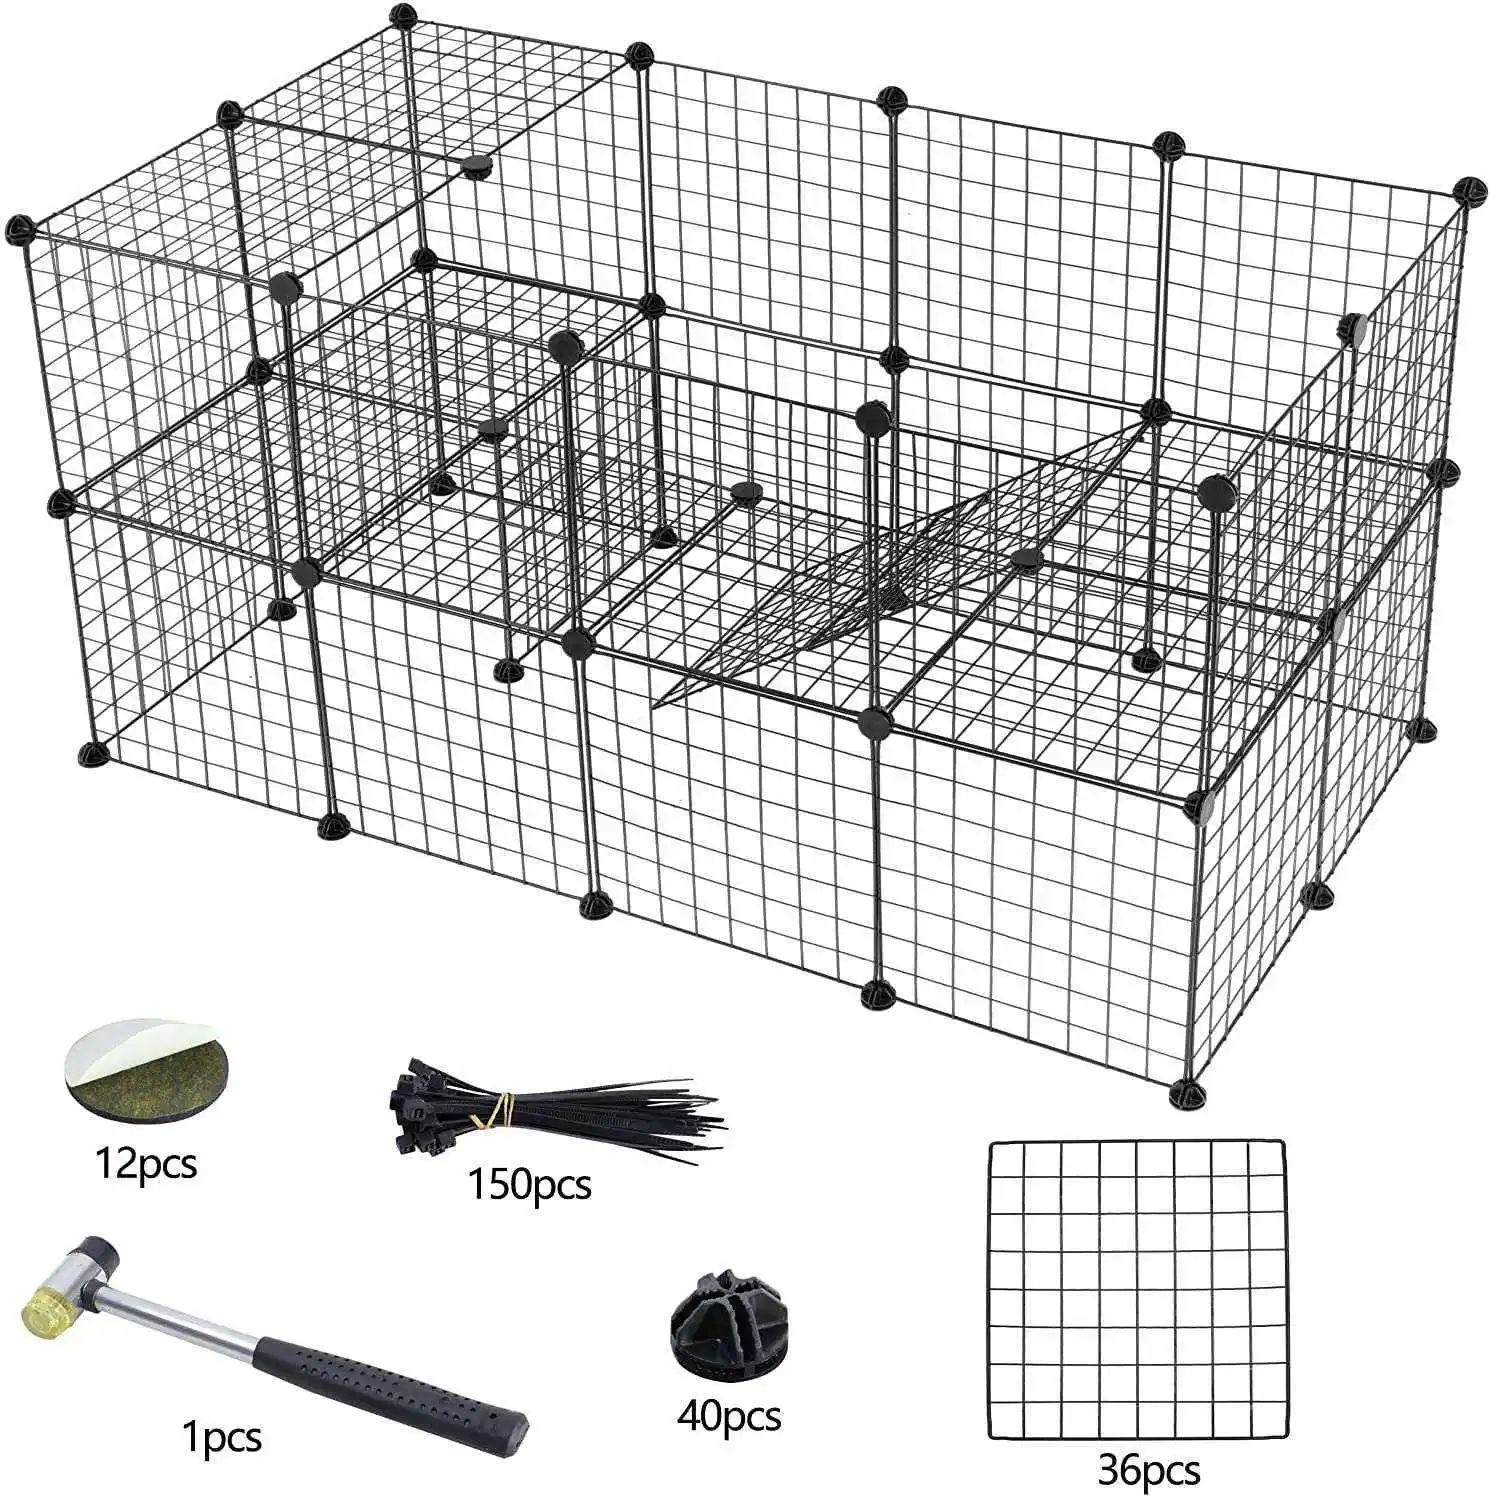 DIY pet playpen dog cat small animal portable metal wire fence